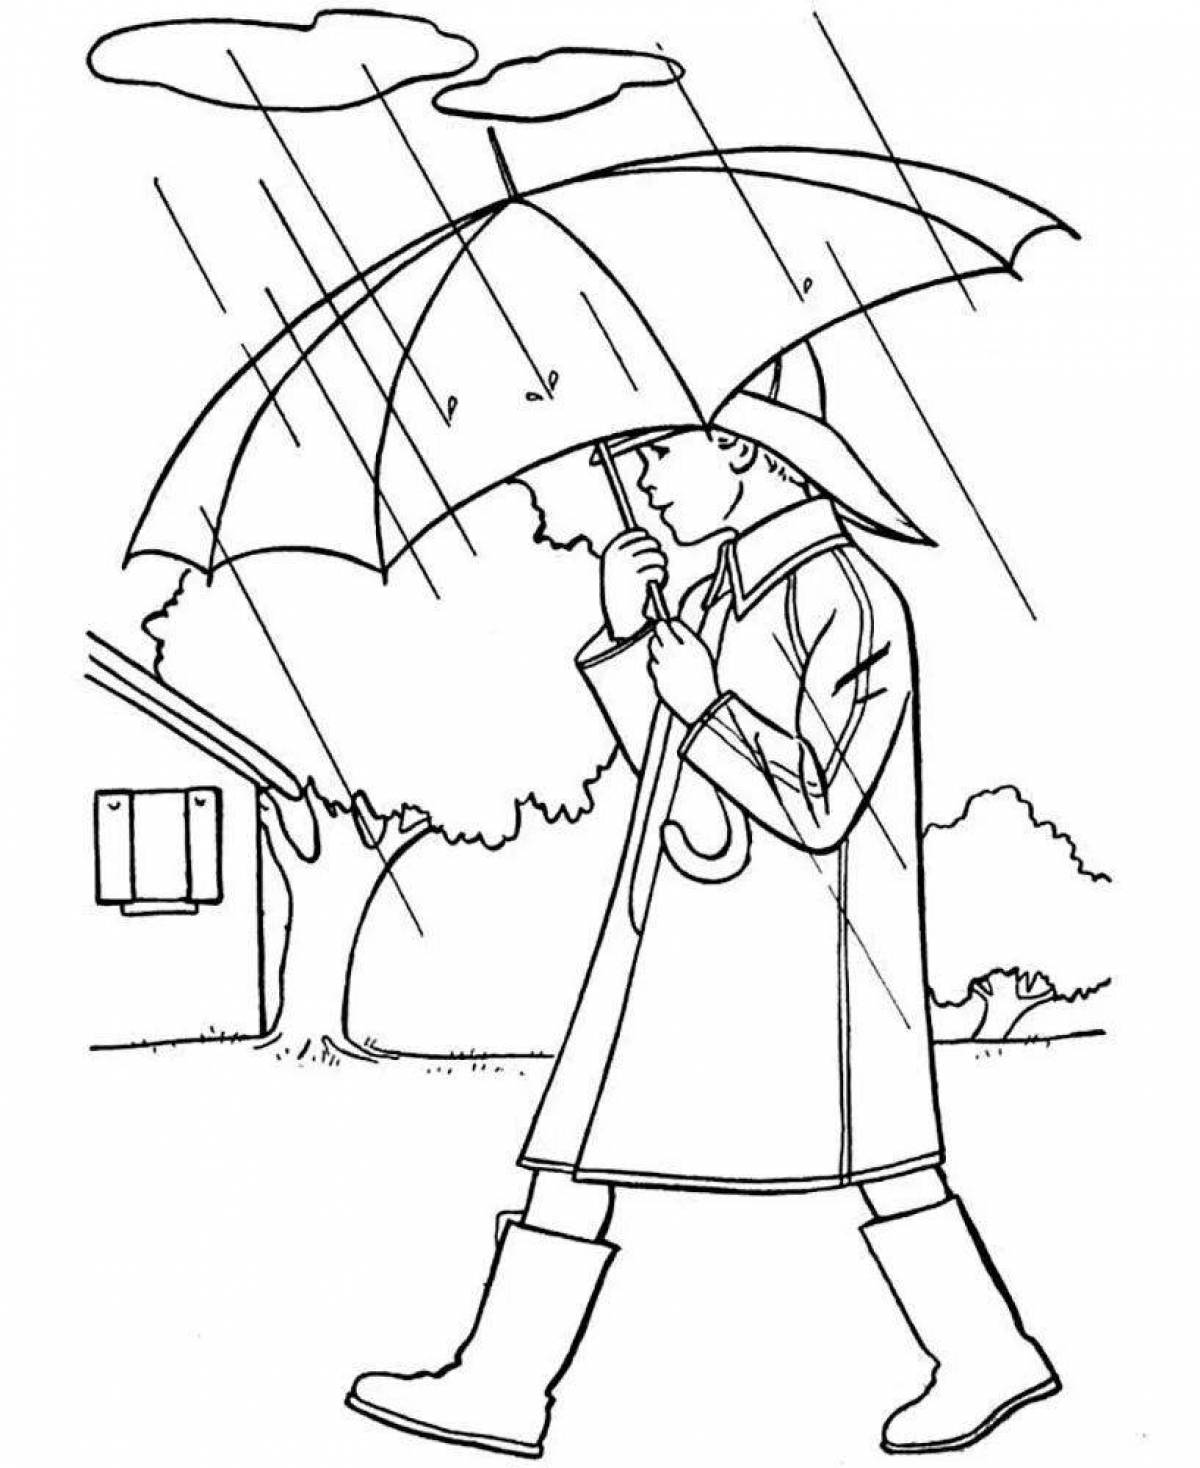 Majestic spring rain coloring page